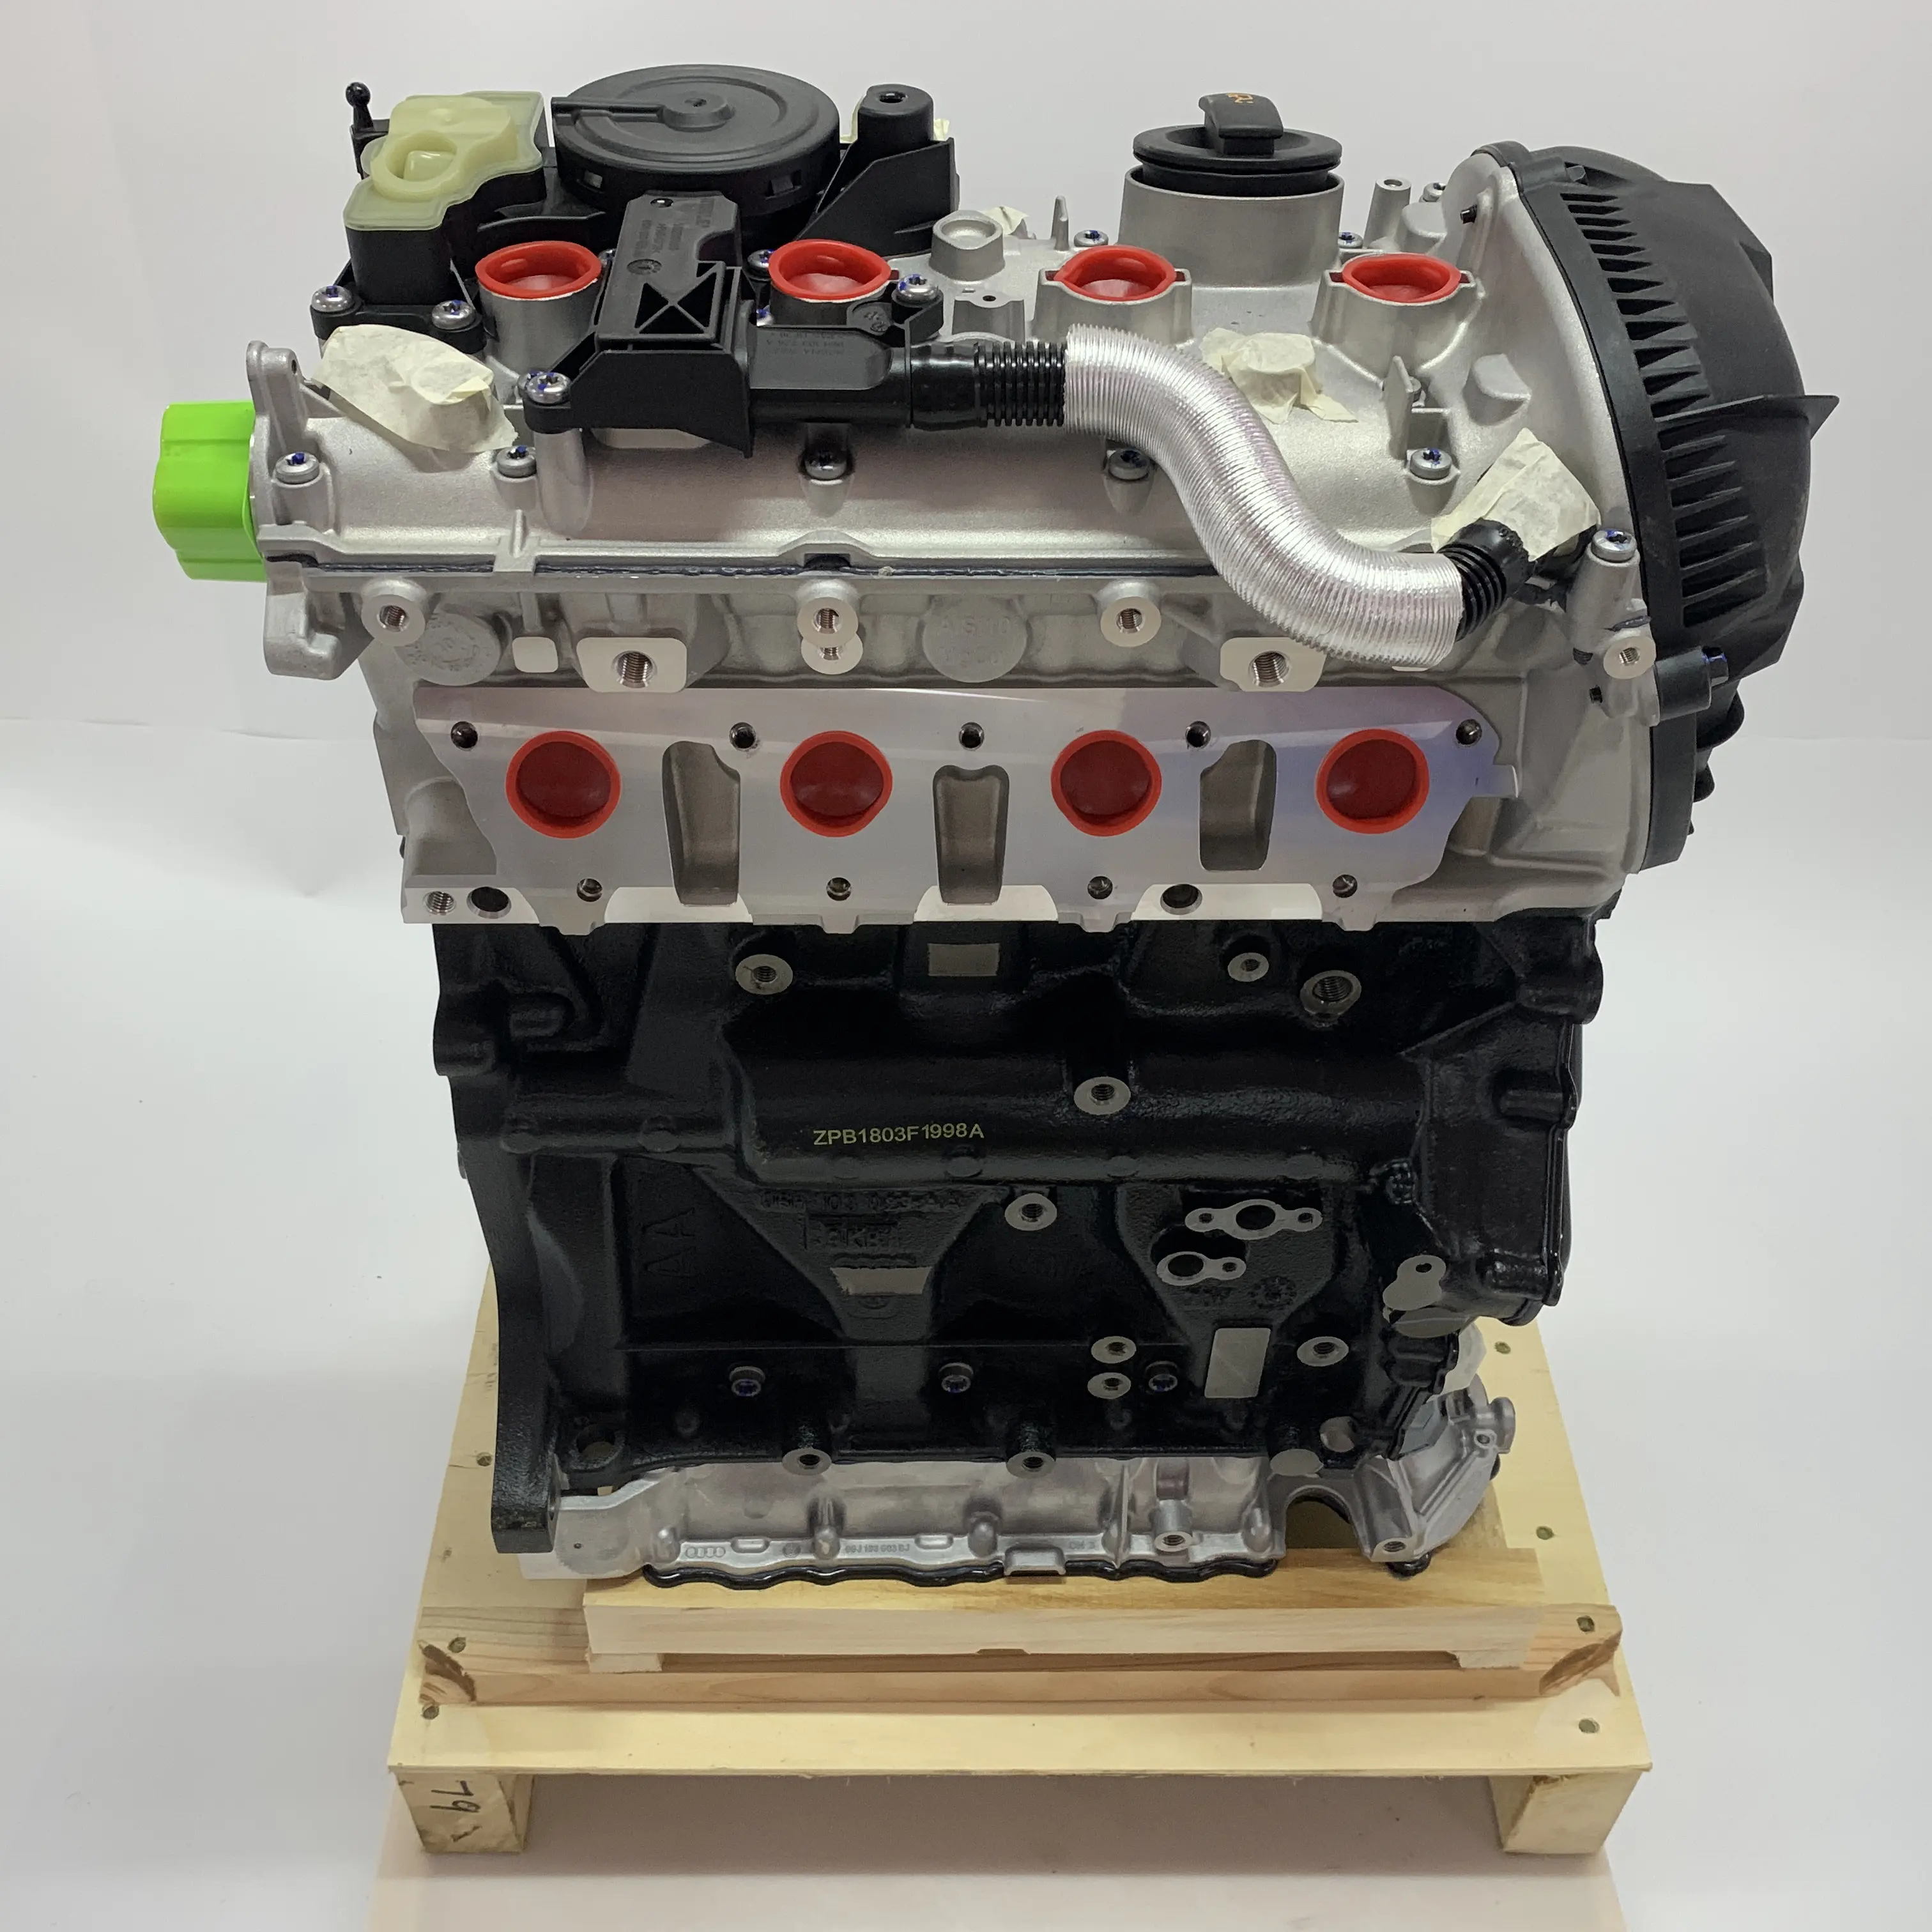 Stock engine assembly suitable for EA888 TSI 1.8T 2.0T engine model CEA CCZ CAW 06J100035H 06J100038D 06J100034T